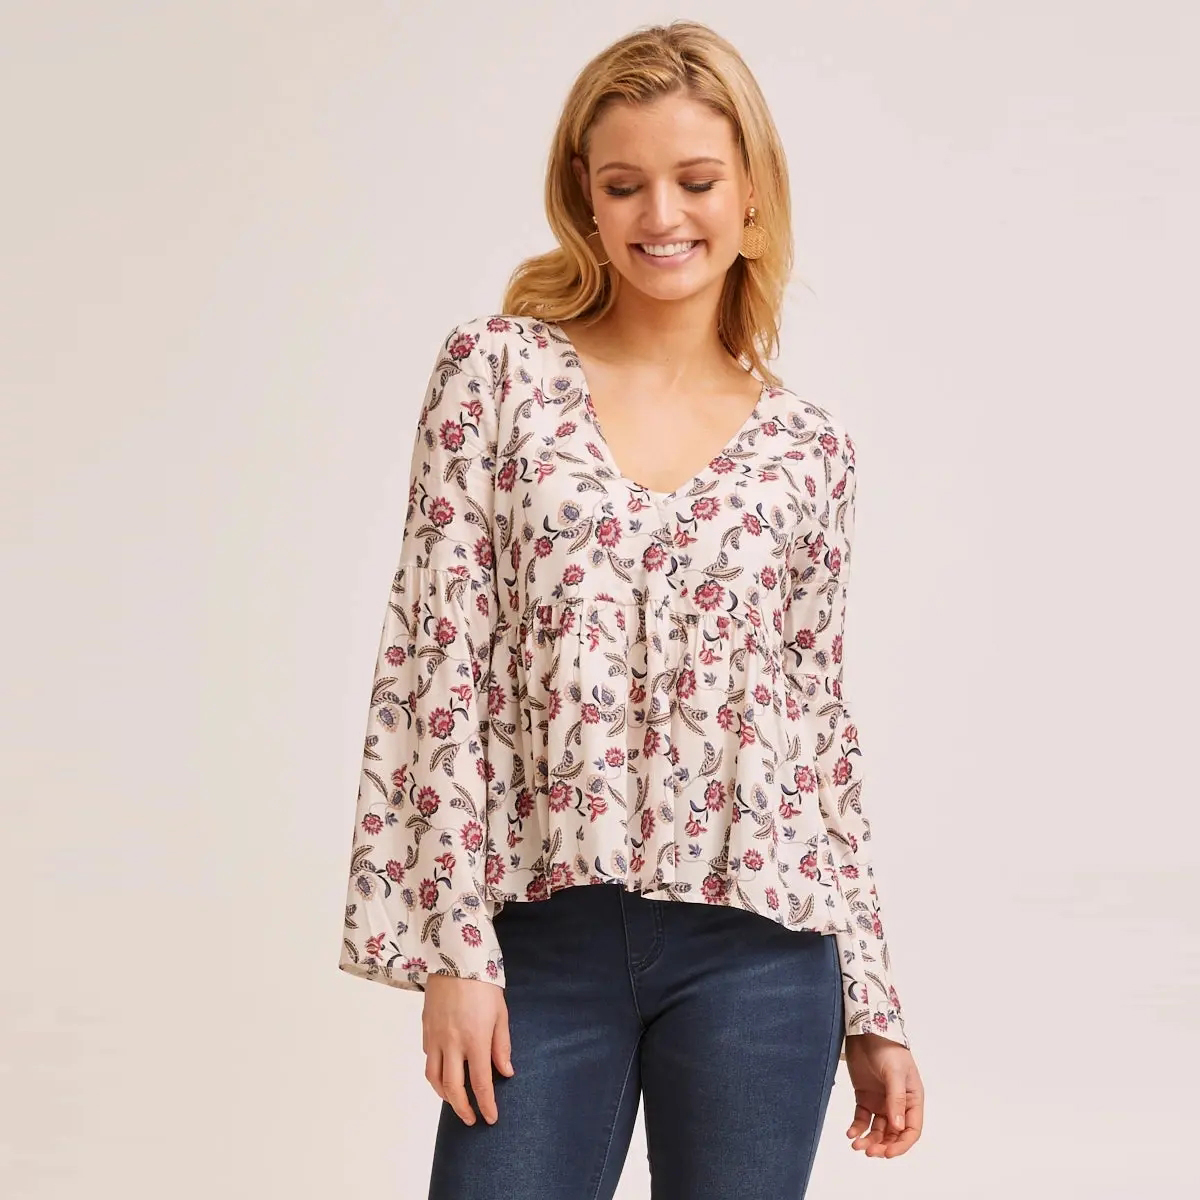 Floral Print Maternity Top For Ladies (2)